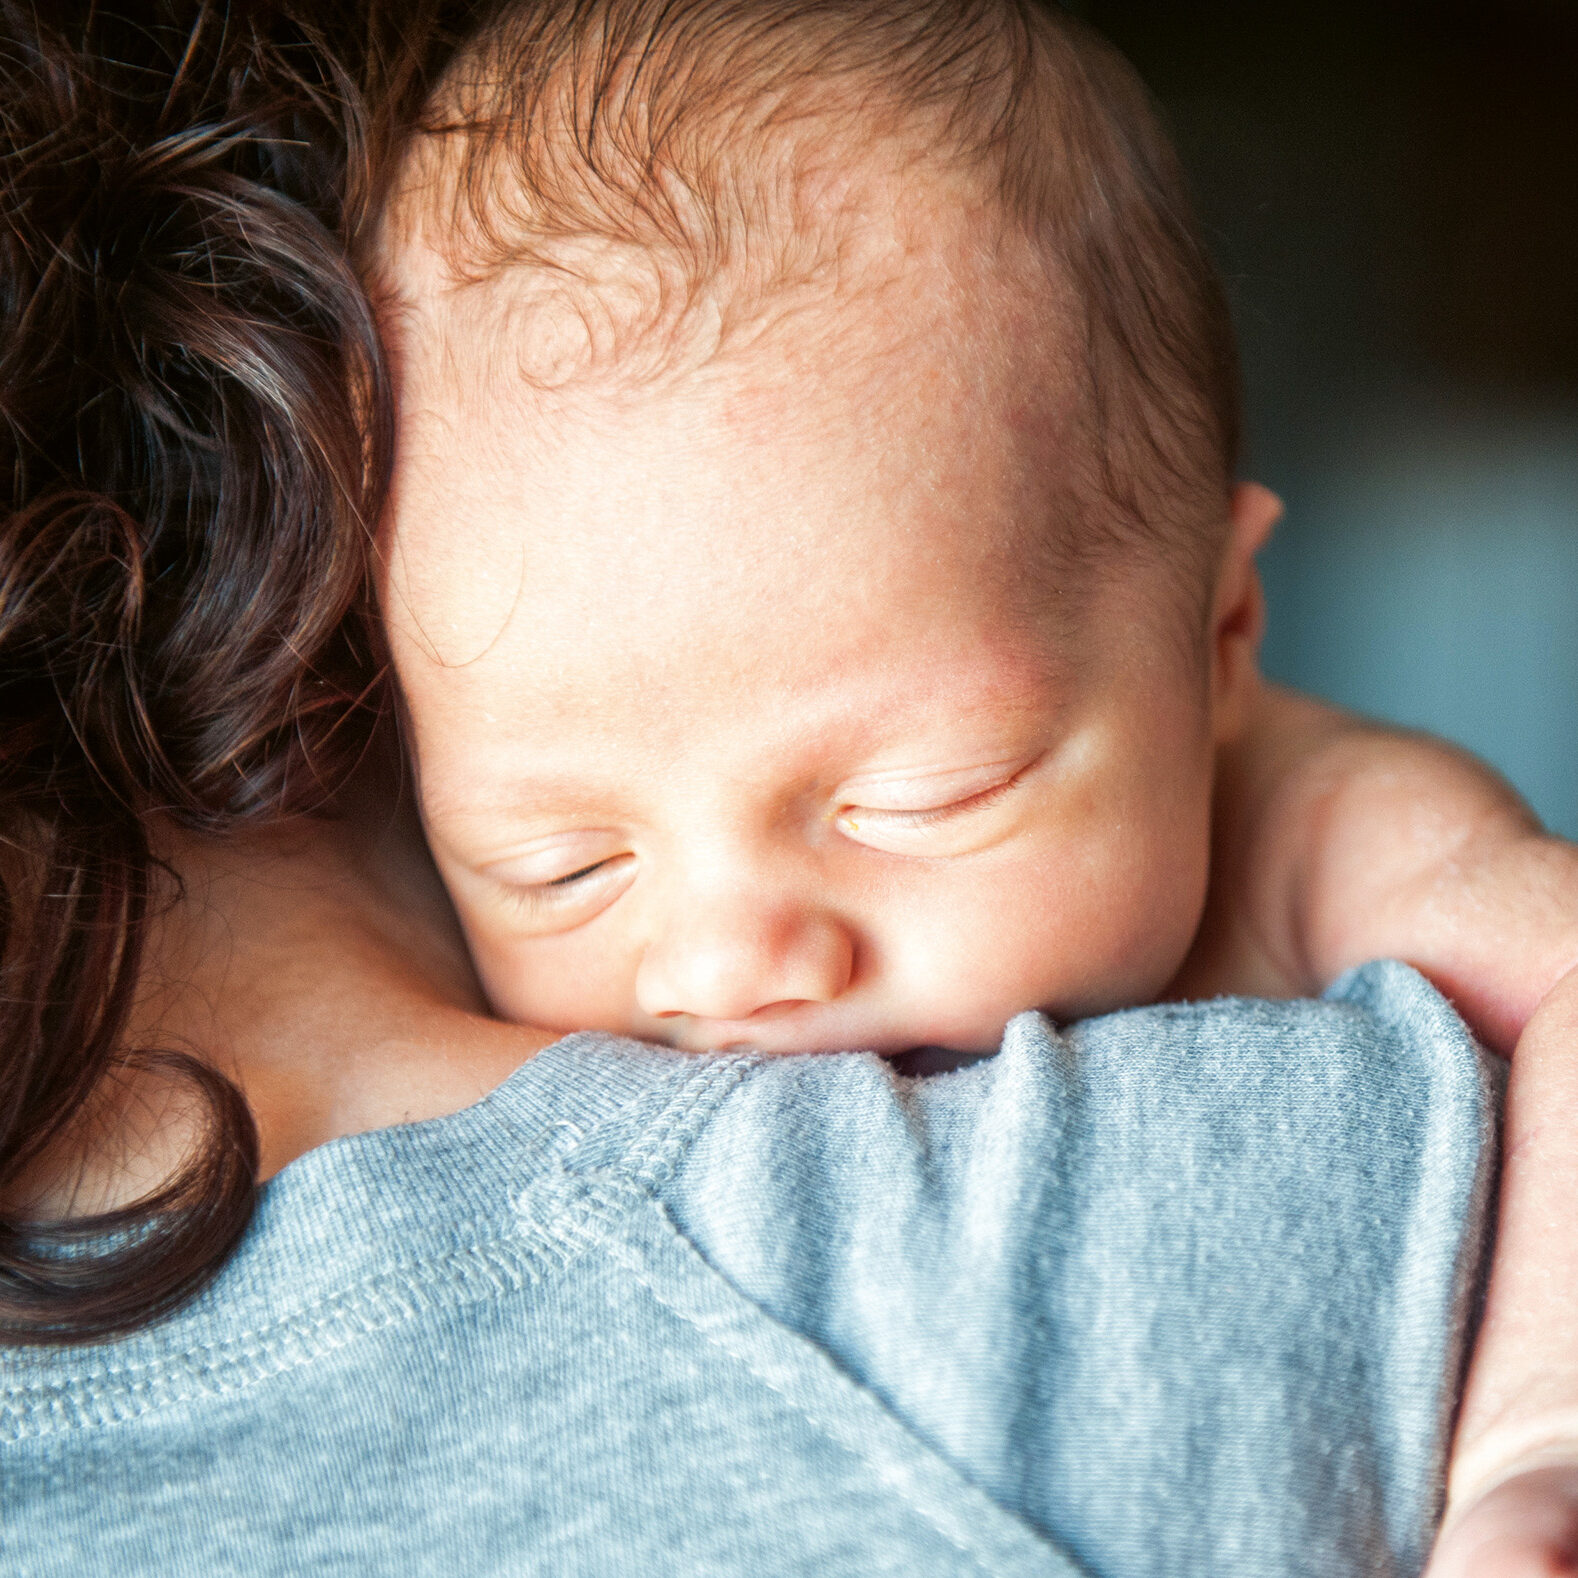 Newborn baby in the arms of his mother